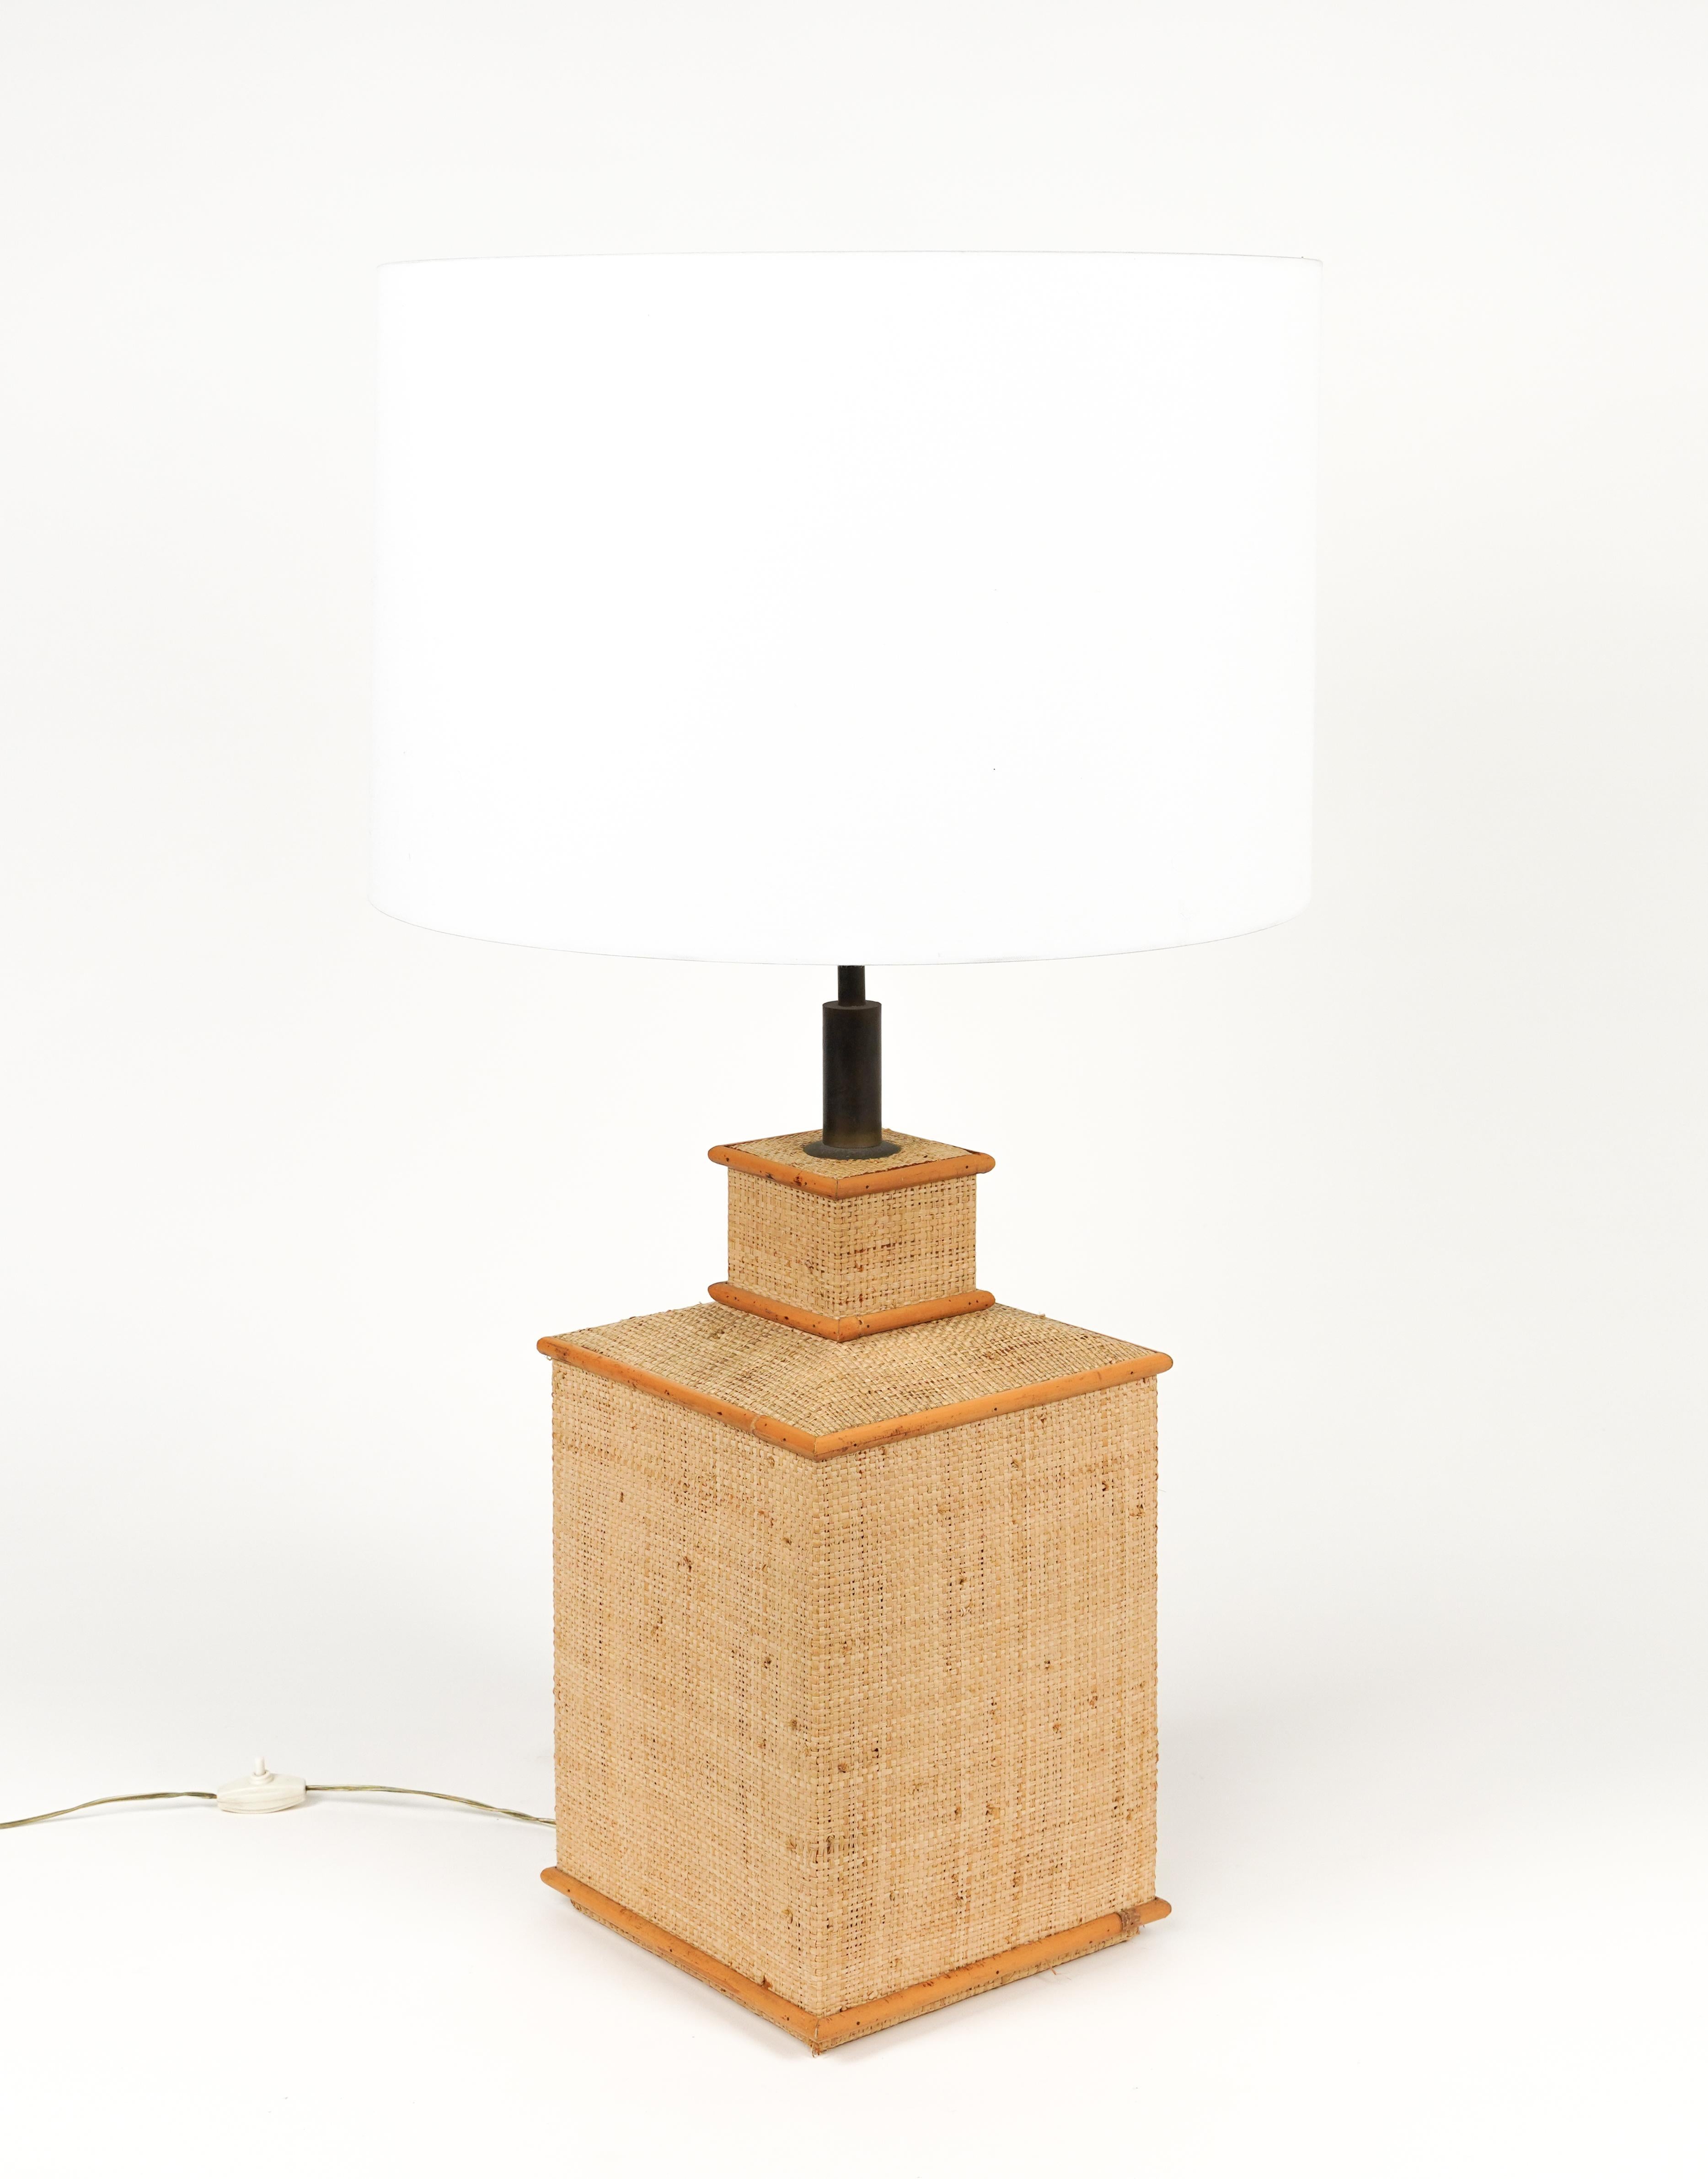 Midcentury amazing big table lamp in Rattan, wicker and brass whit round white lampshade in the style of Vivai Del Sud.

Made in Italy in the 1960s.

A beautiful lamp that is perfectly working but most of all, it provides an amazing visual impact in